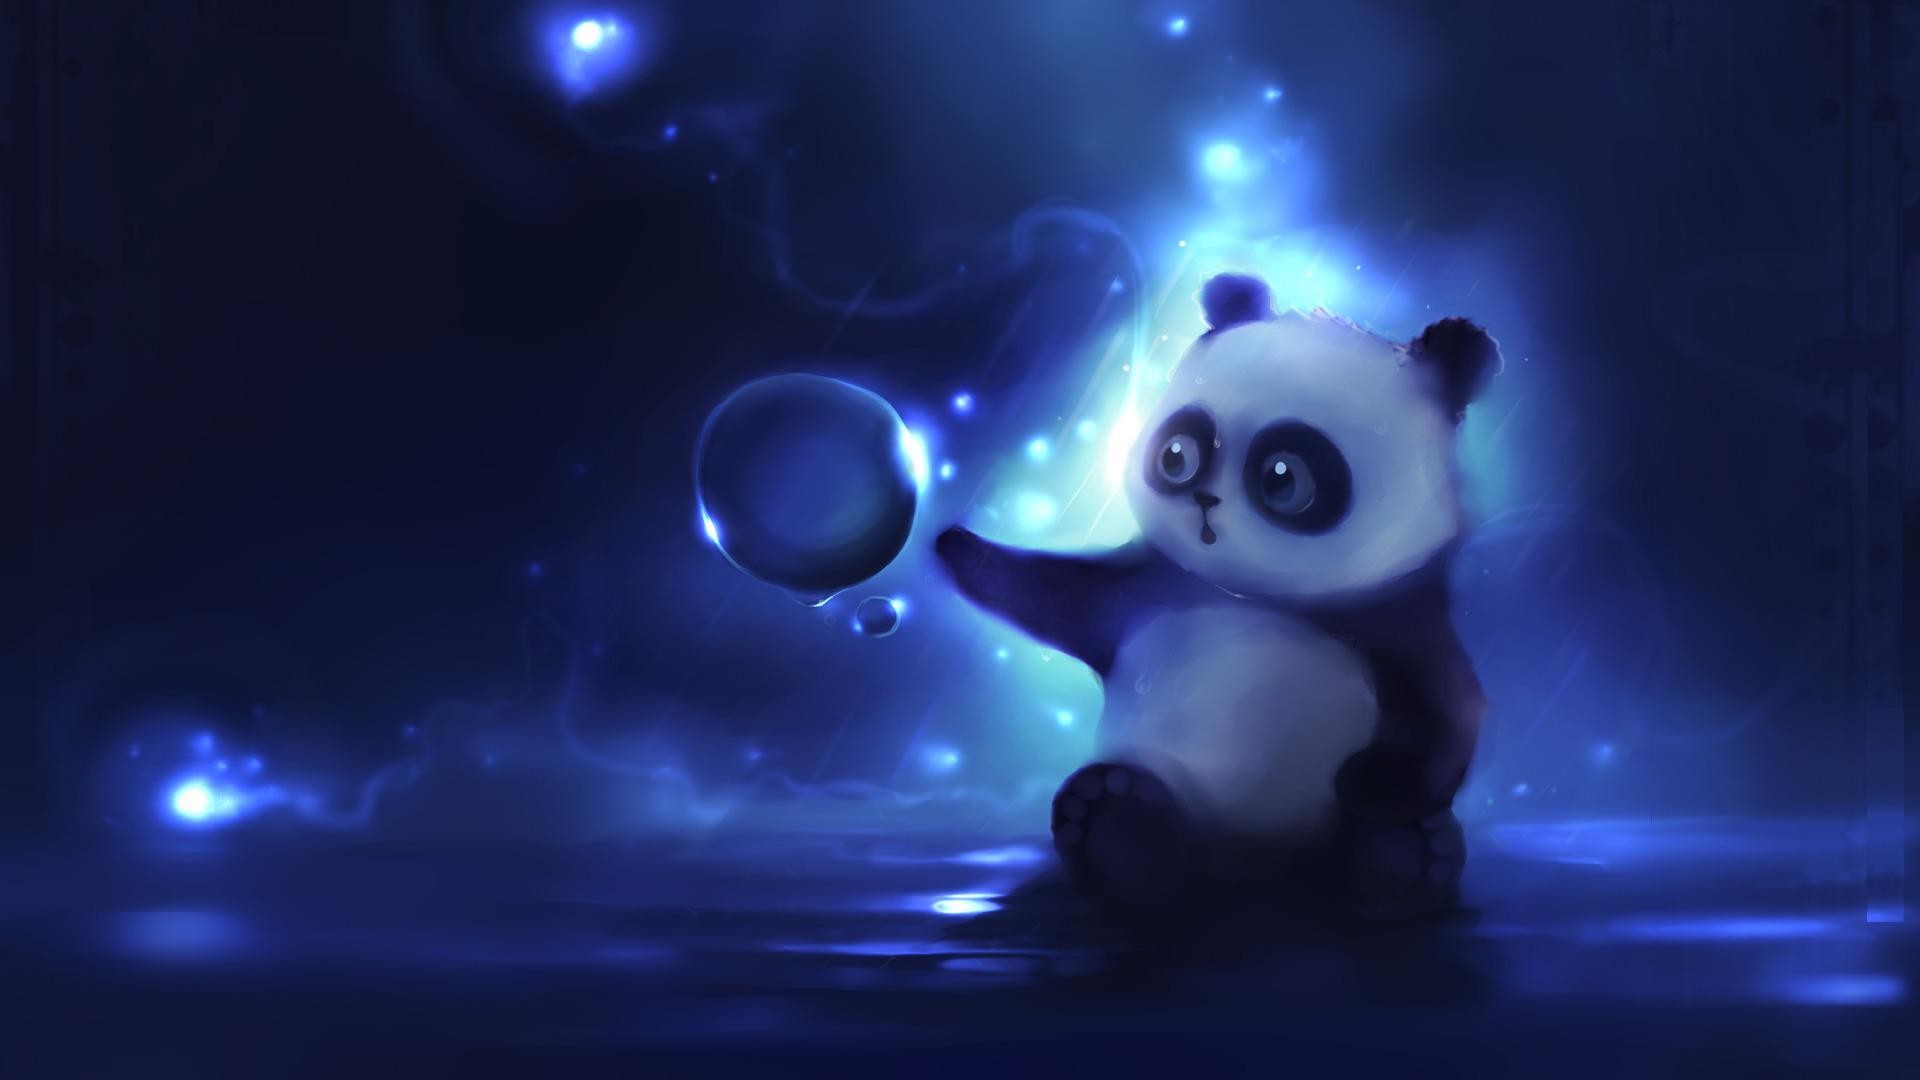 1920x1080 Cute Animated Moving Wallpapers For Desktop Cute animated panda .